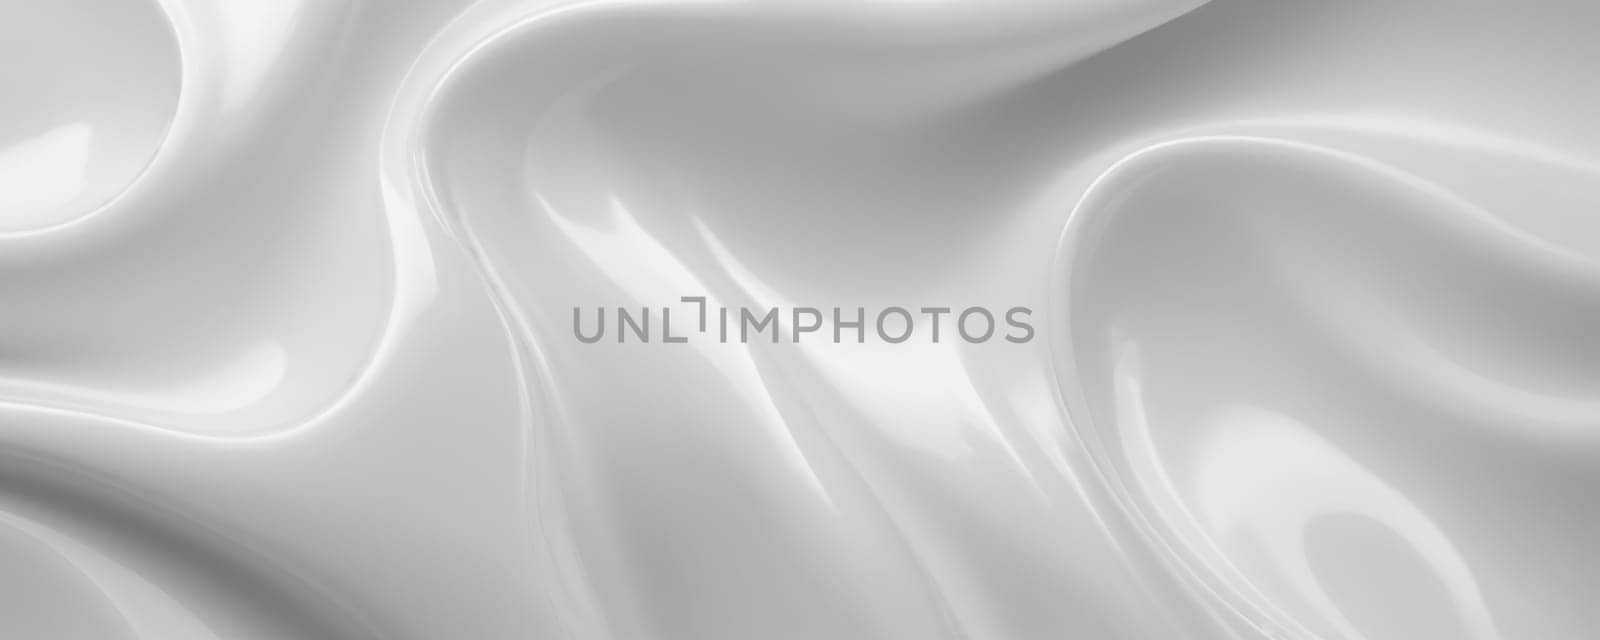 A smooth, flowing, and abstract pattern that resembles liquid or silk fabric. It is monochromatic, with various shades of white and grey creating a soft, elegant look. The curves and swirls in the design give it a dynamic and fluid appearance. There are highlights and shadows that add depth to the image, making it appear three-dimensional. The overall mood conveyed by this image is calmness and elegance due to its soft tones and flowing lines. Generative AI